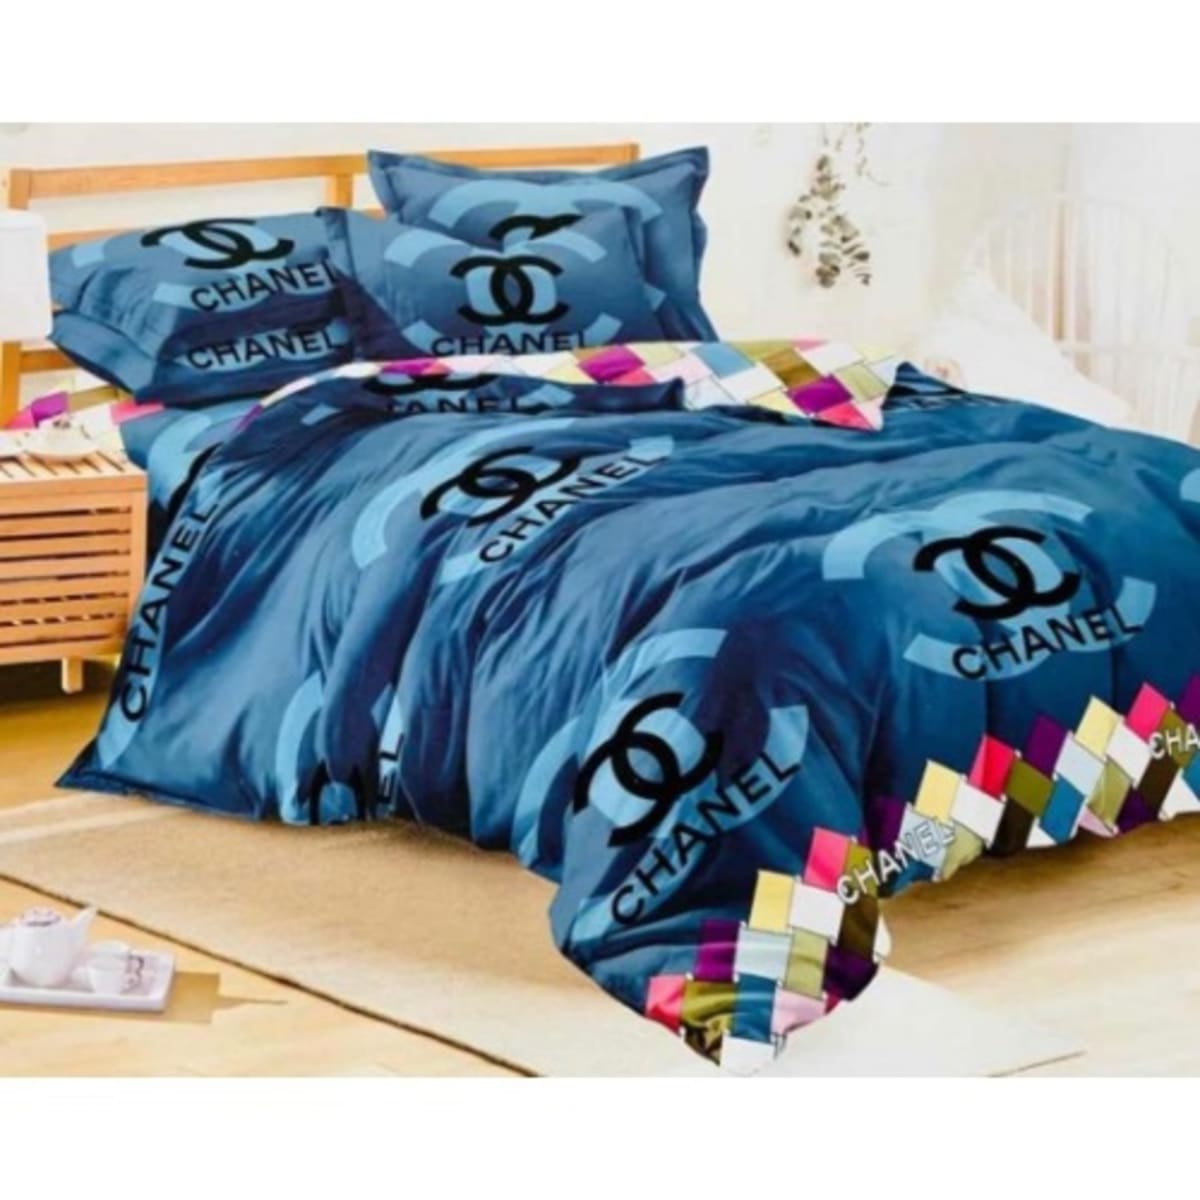 Complete Bedding Set - Duvet, Bedspread With Pillowcases - Chanel Print